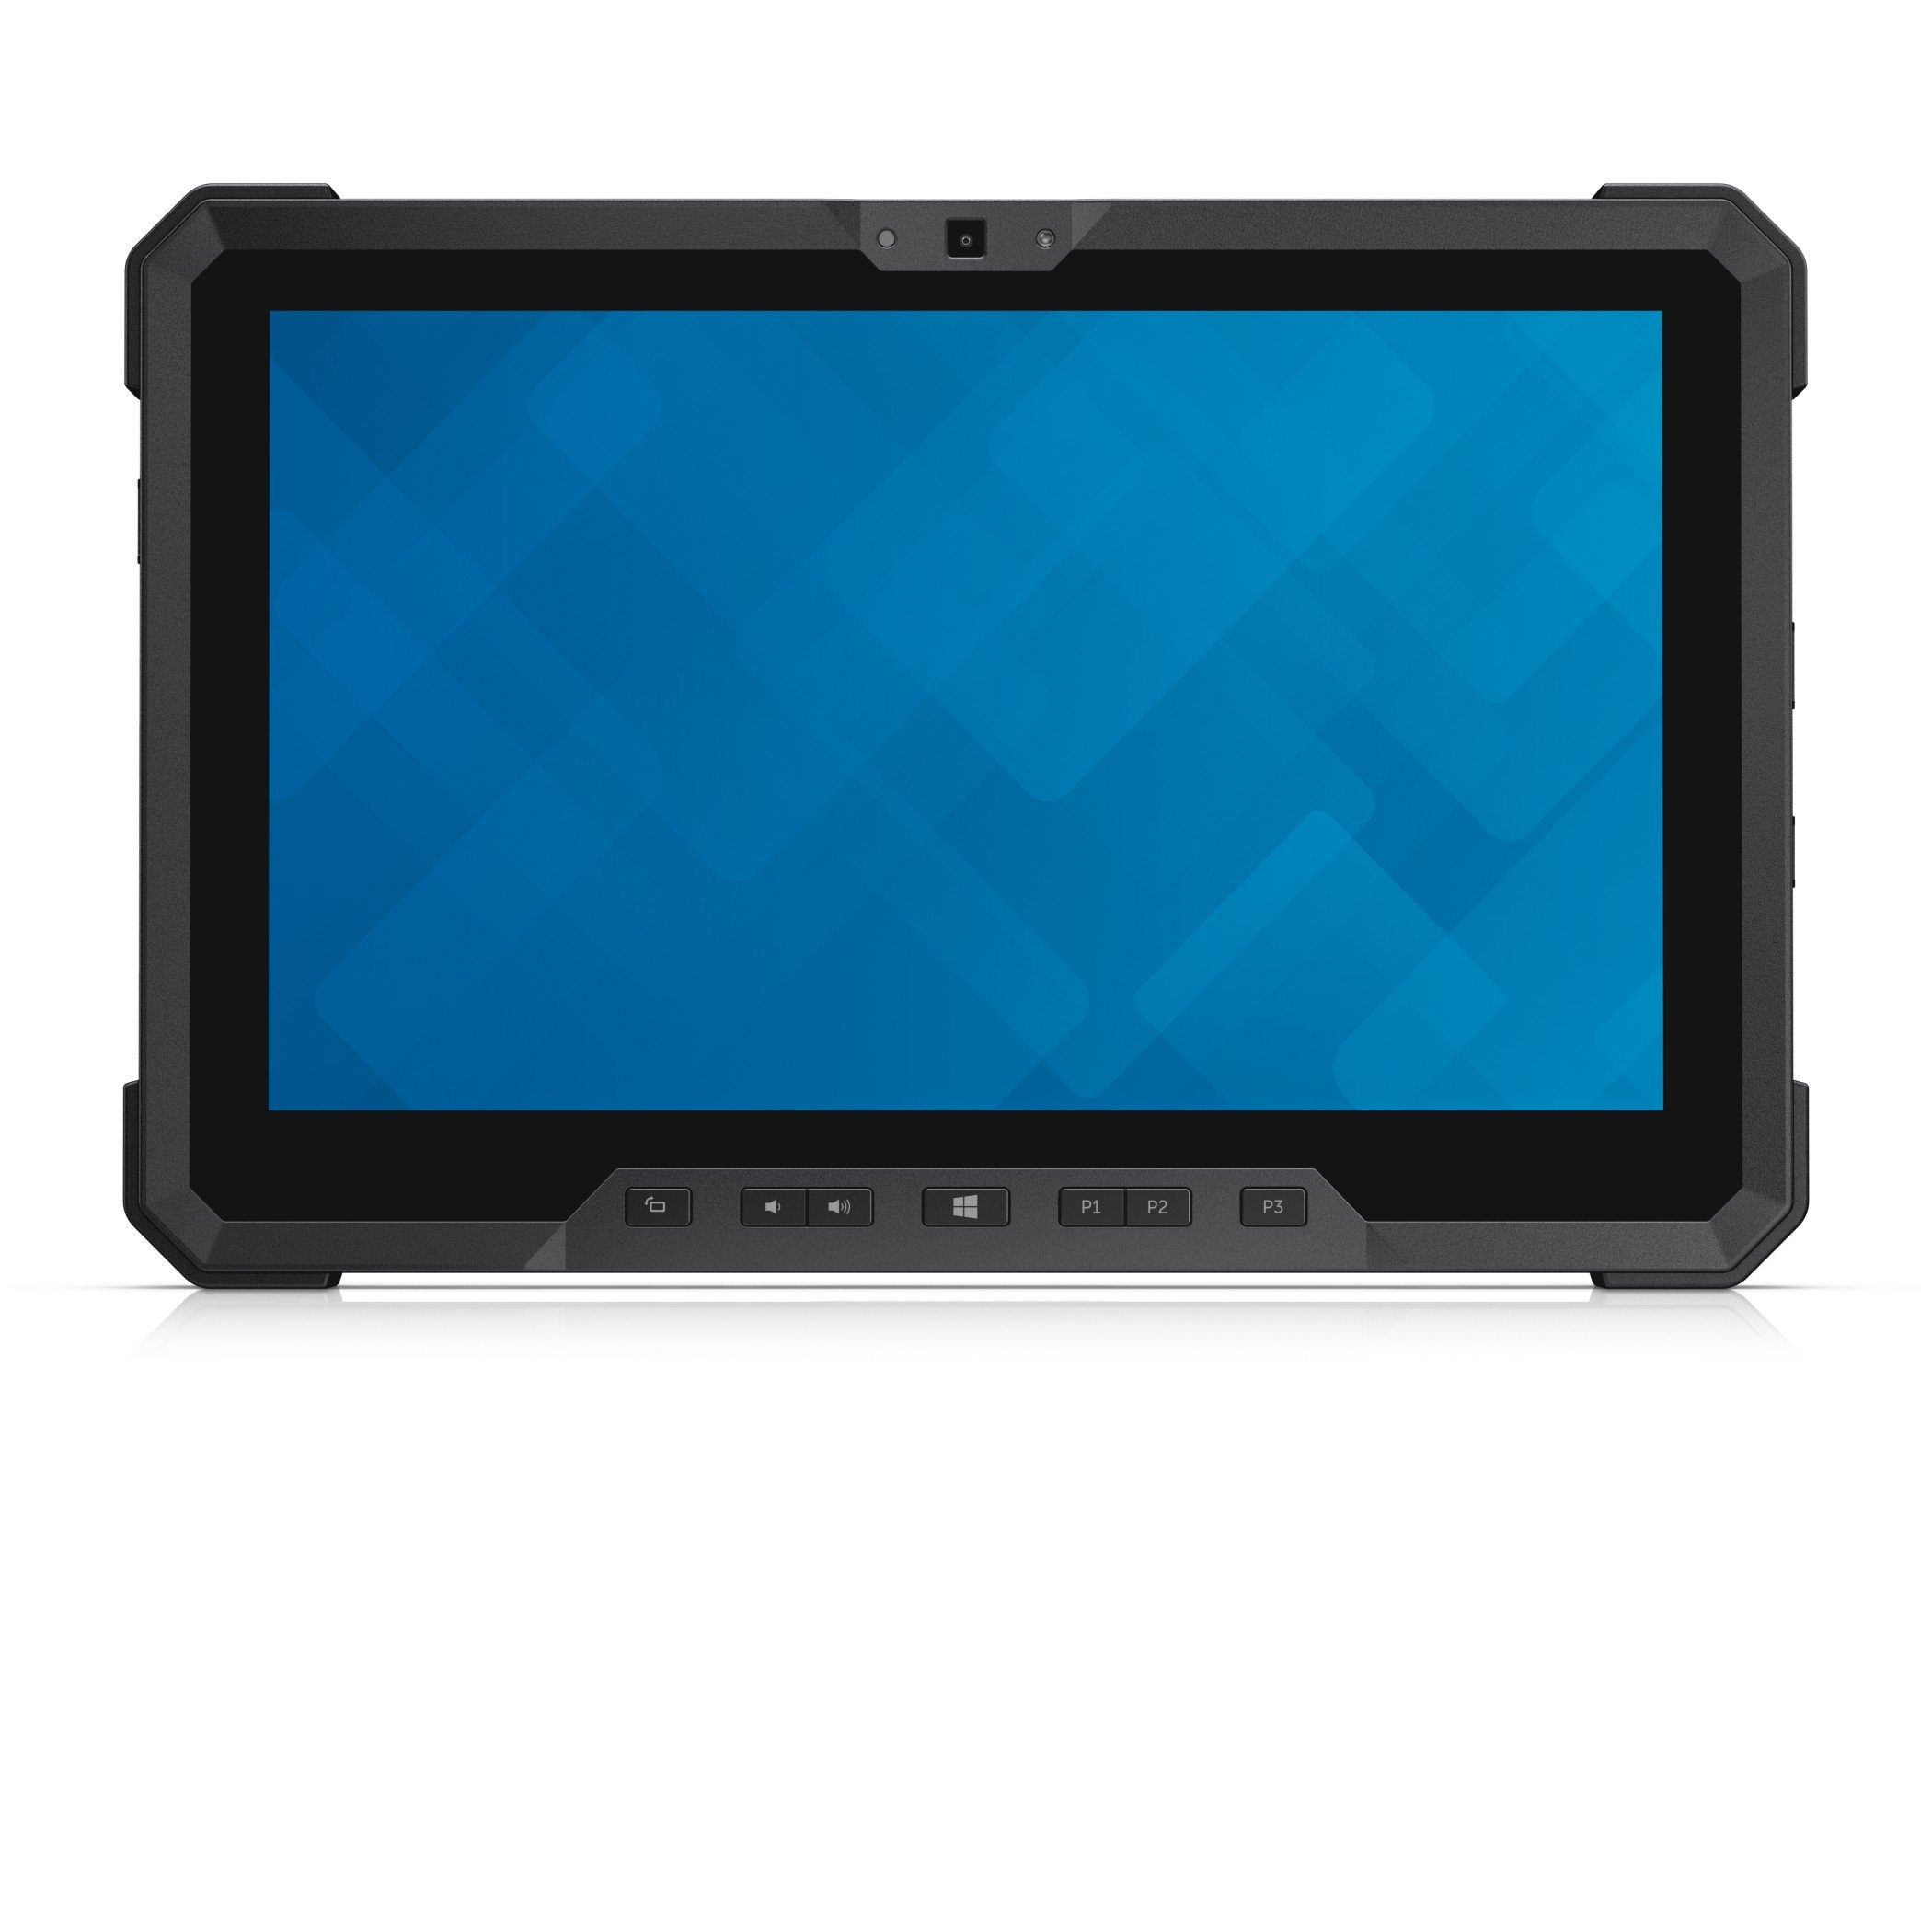 Dell Latitude Rugged 7212 FHD Touch Tablet PC (Intel Core i5 7300U Up to 3.5GHz, 8GB Ram, 128GB SSD, Camera) Win 10 Pro